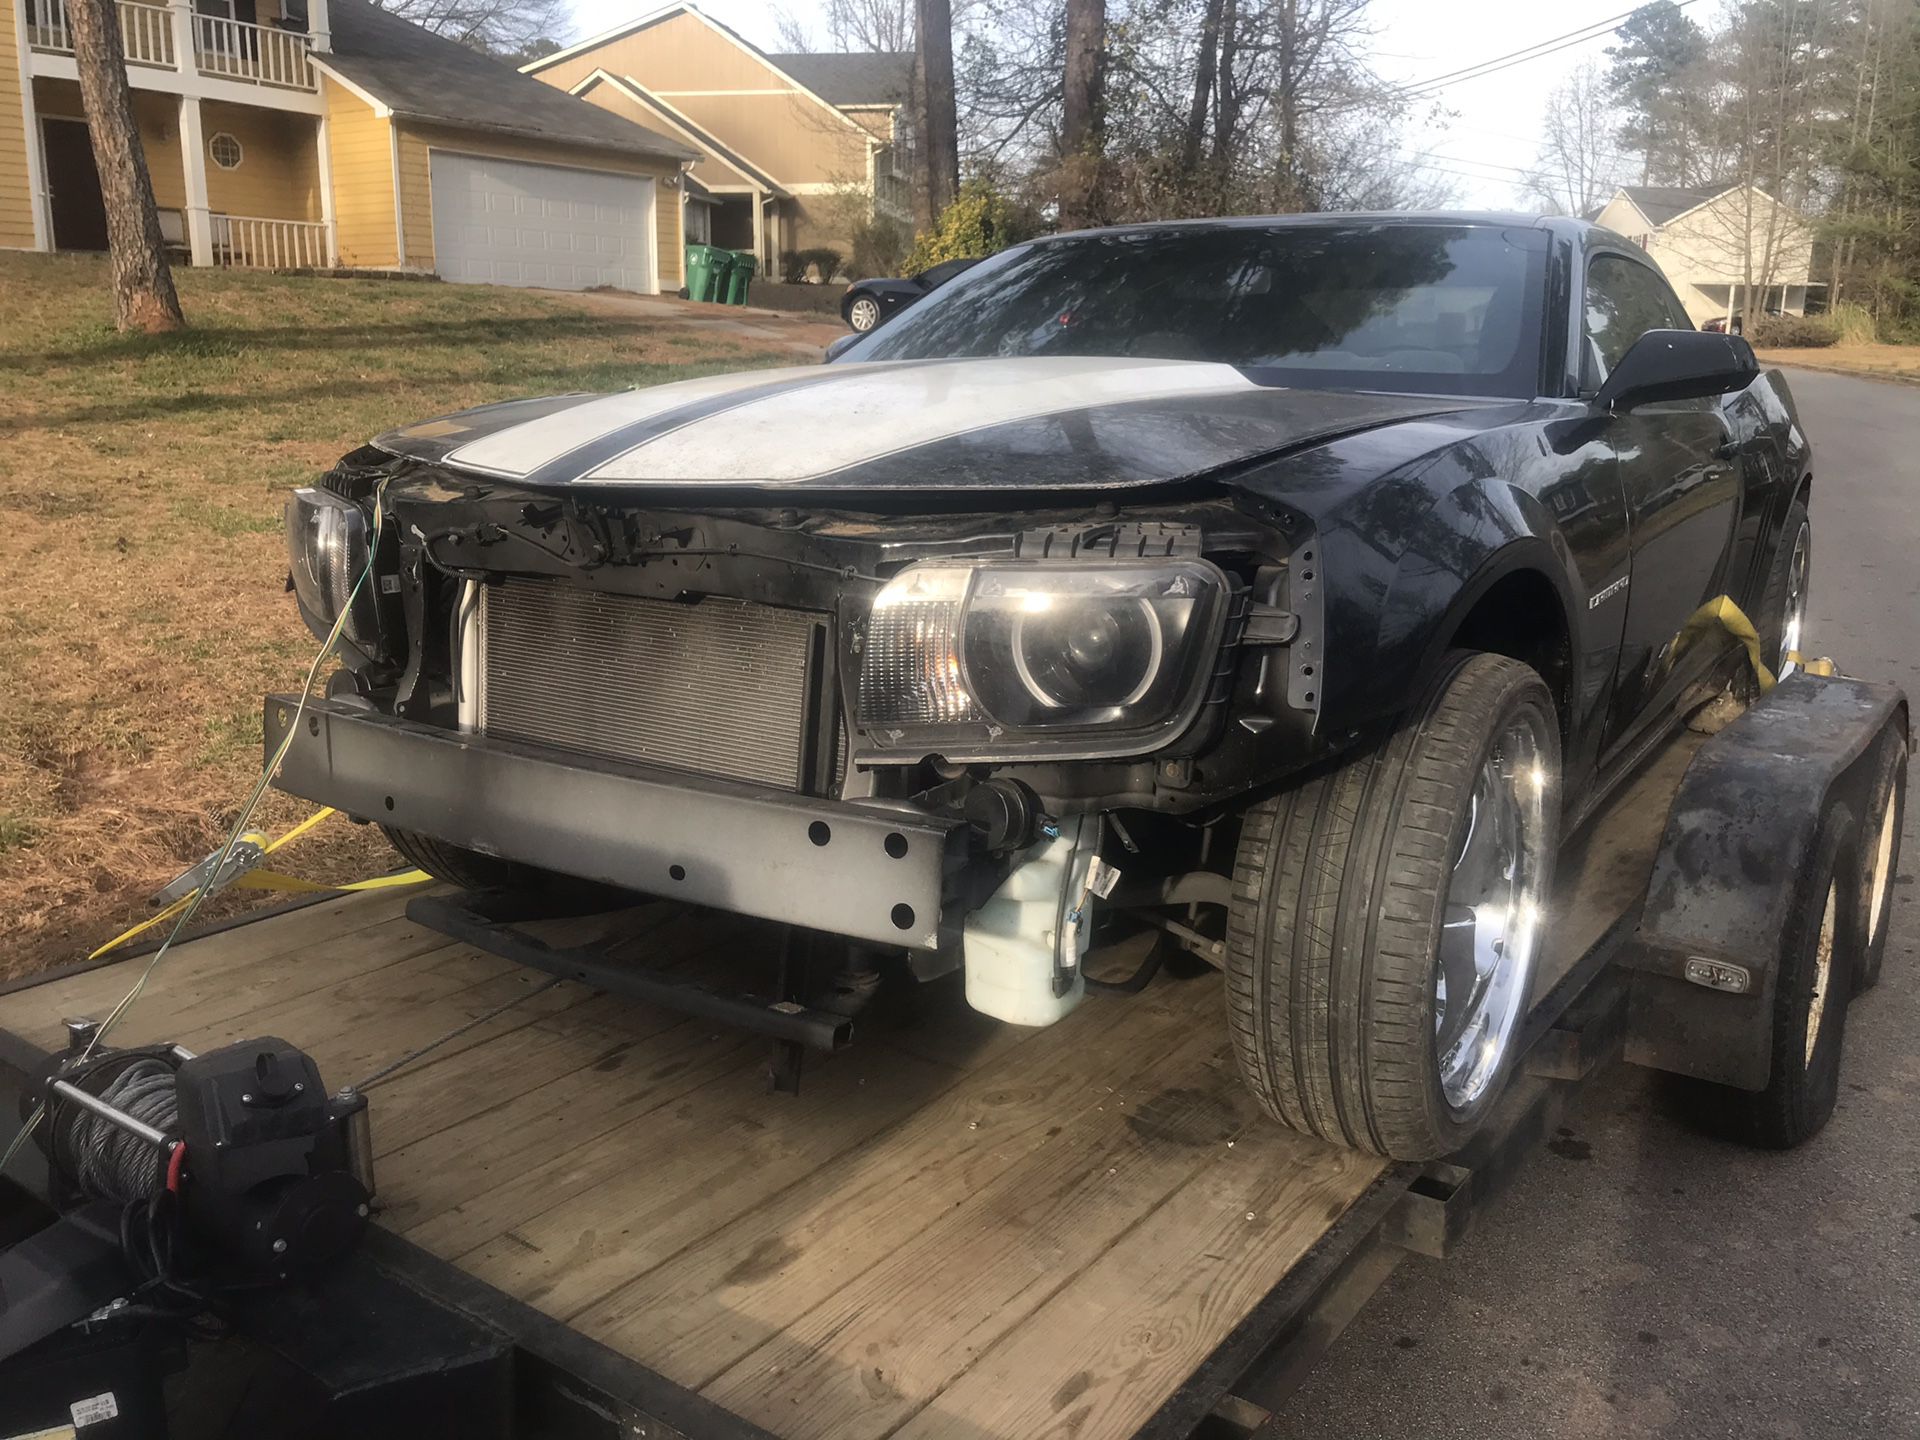 Camaro SS Parts Car Headlights sold Salvage Title Whole car $2000